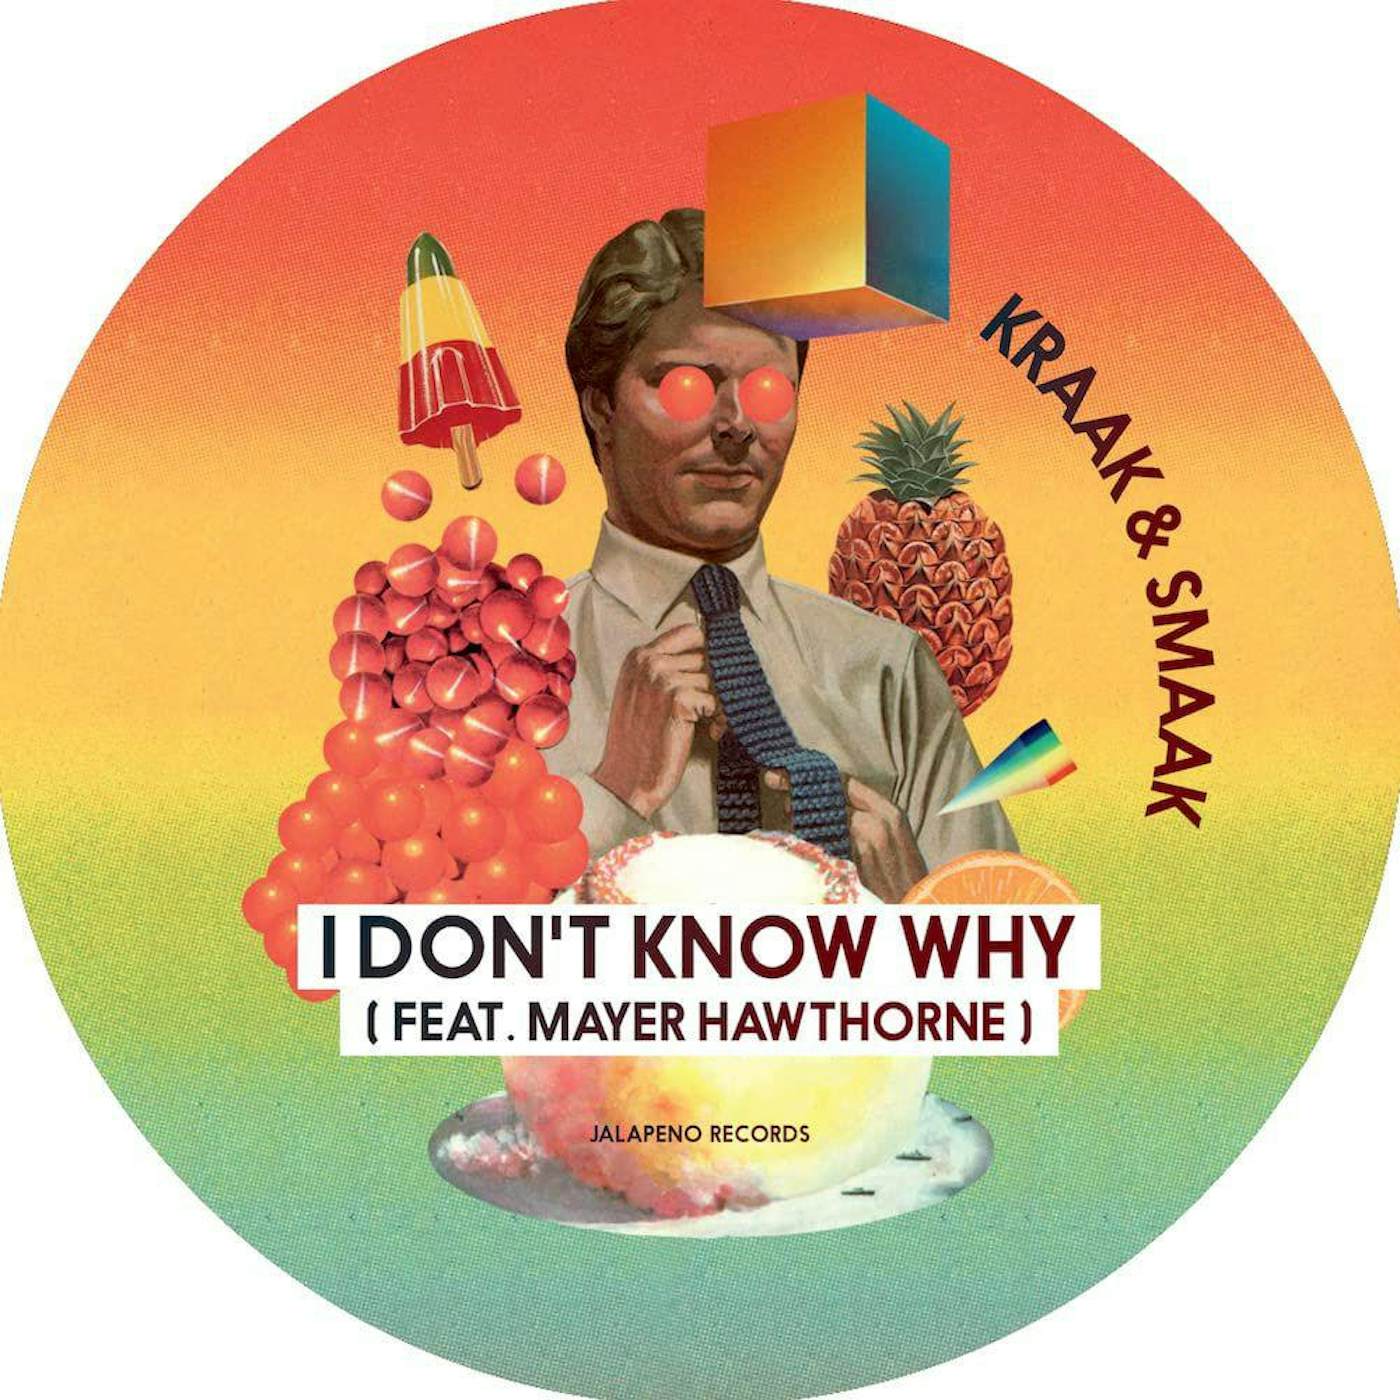 Kraak & Smaak I DON'T KNOW WHY - FEAT. MAYER HAWTHORNE Vinyl Record